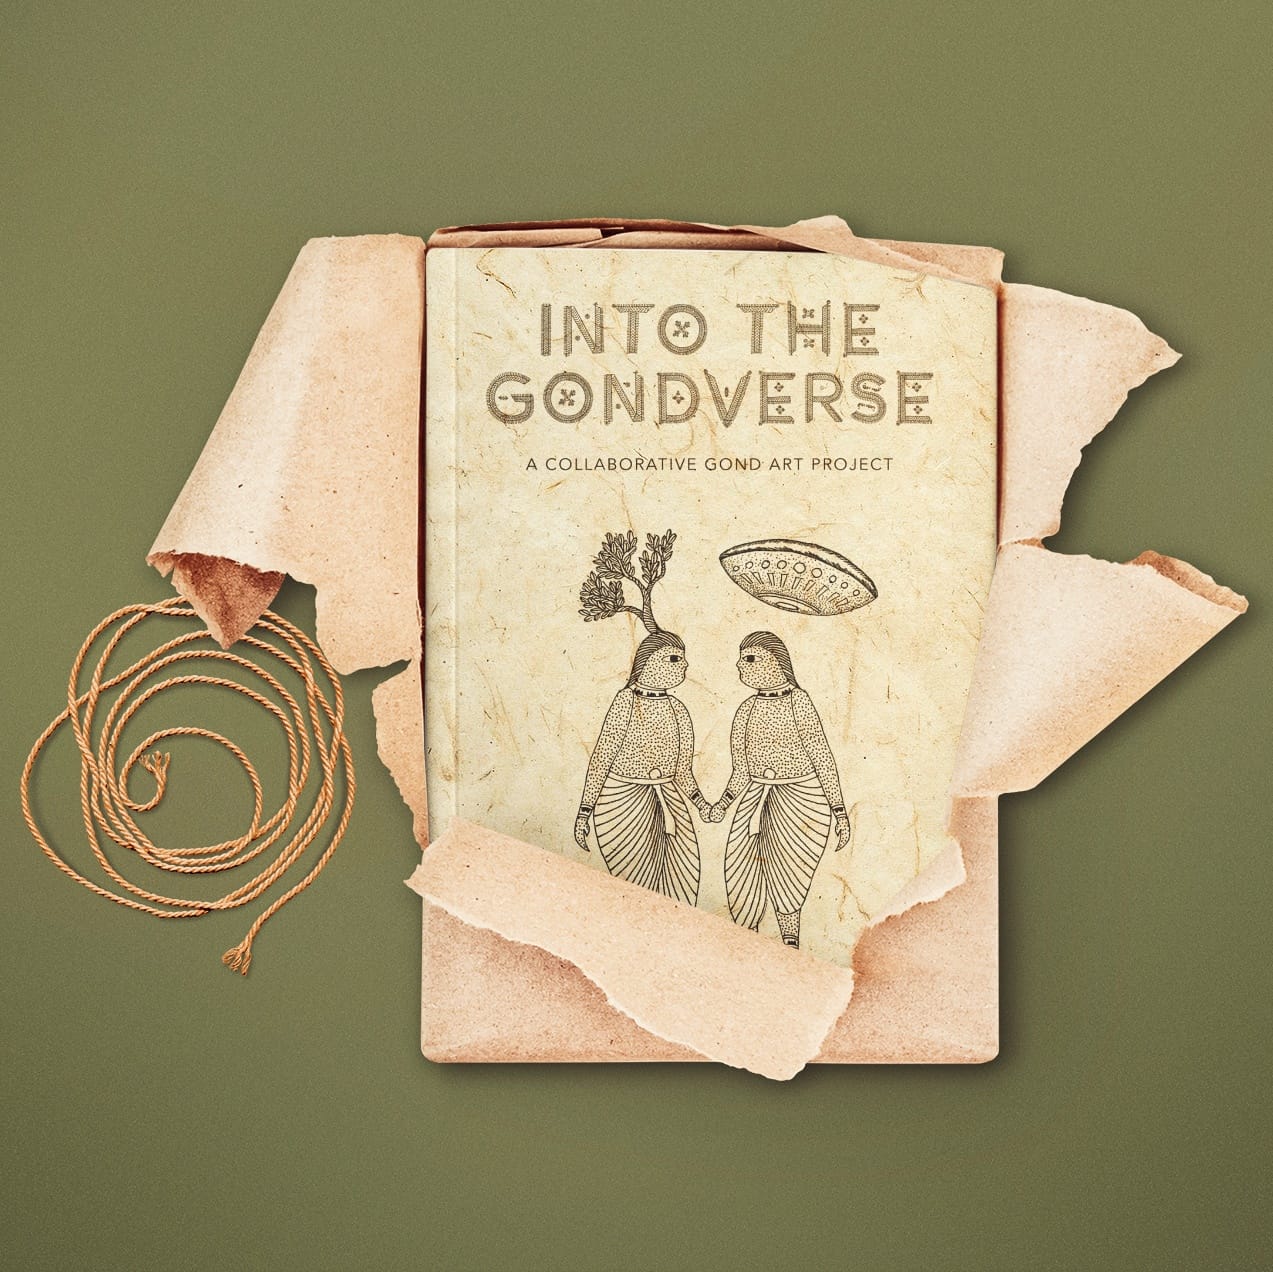 Into the Gondverse